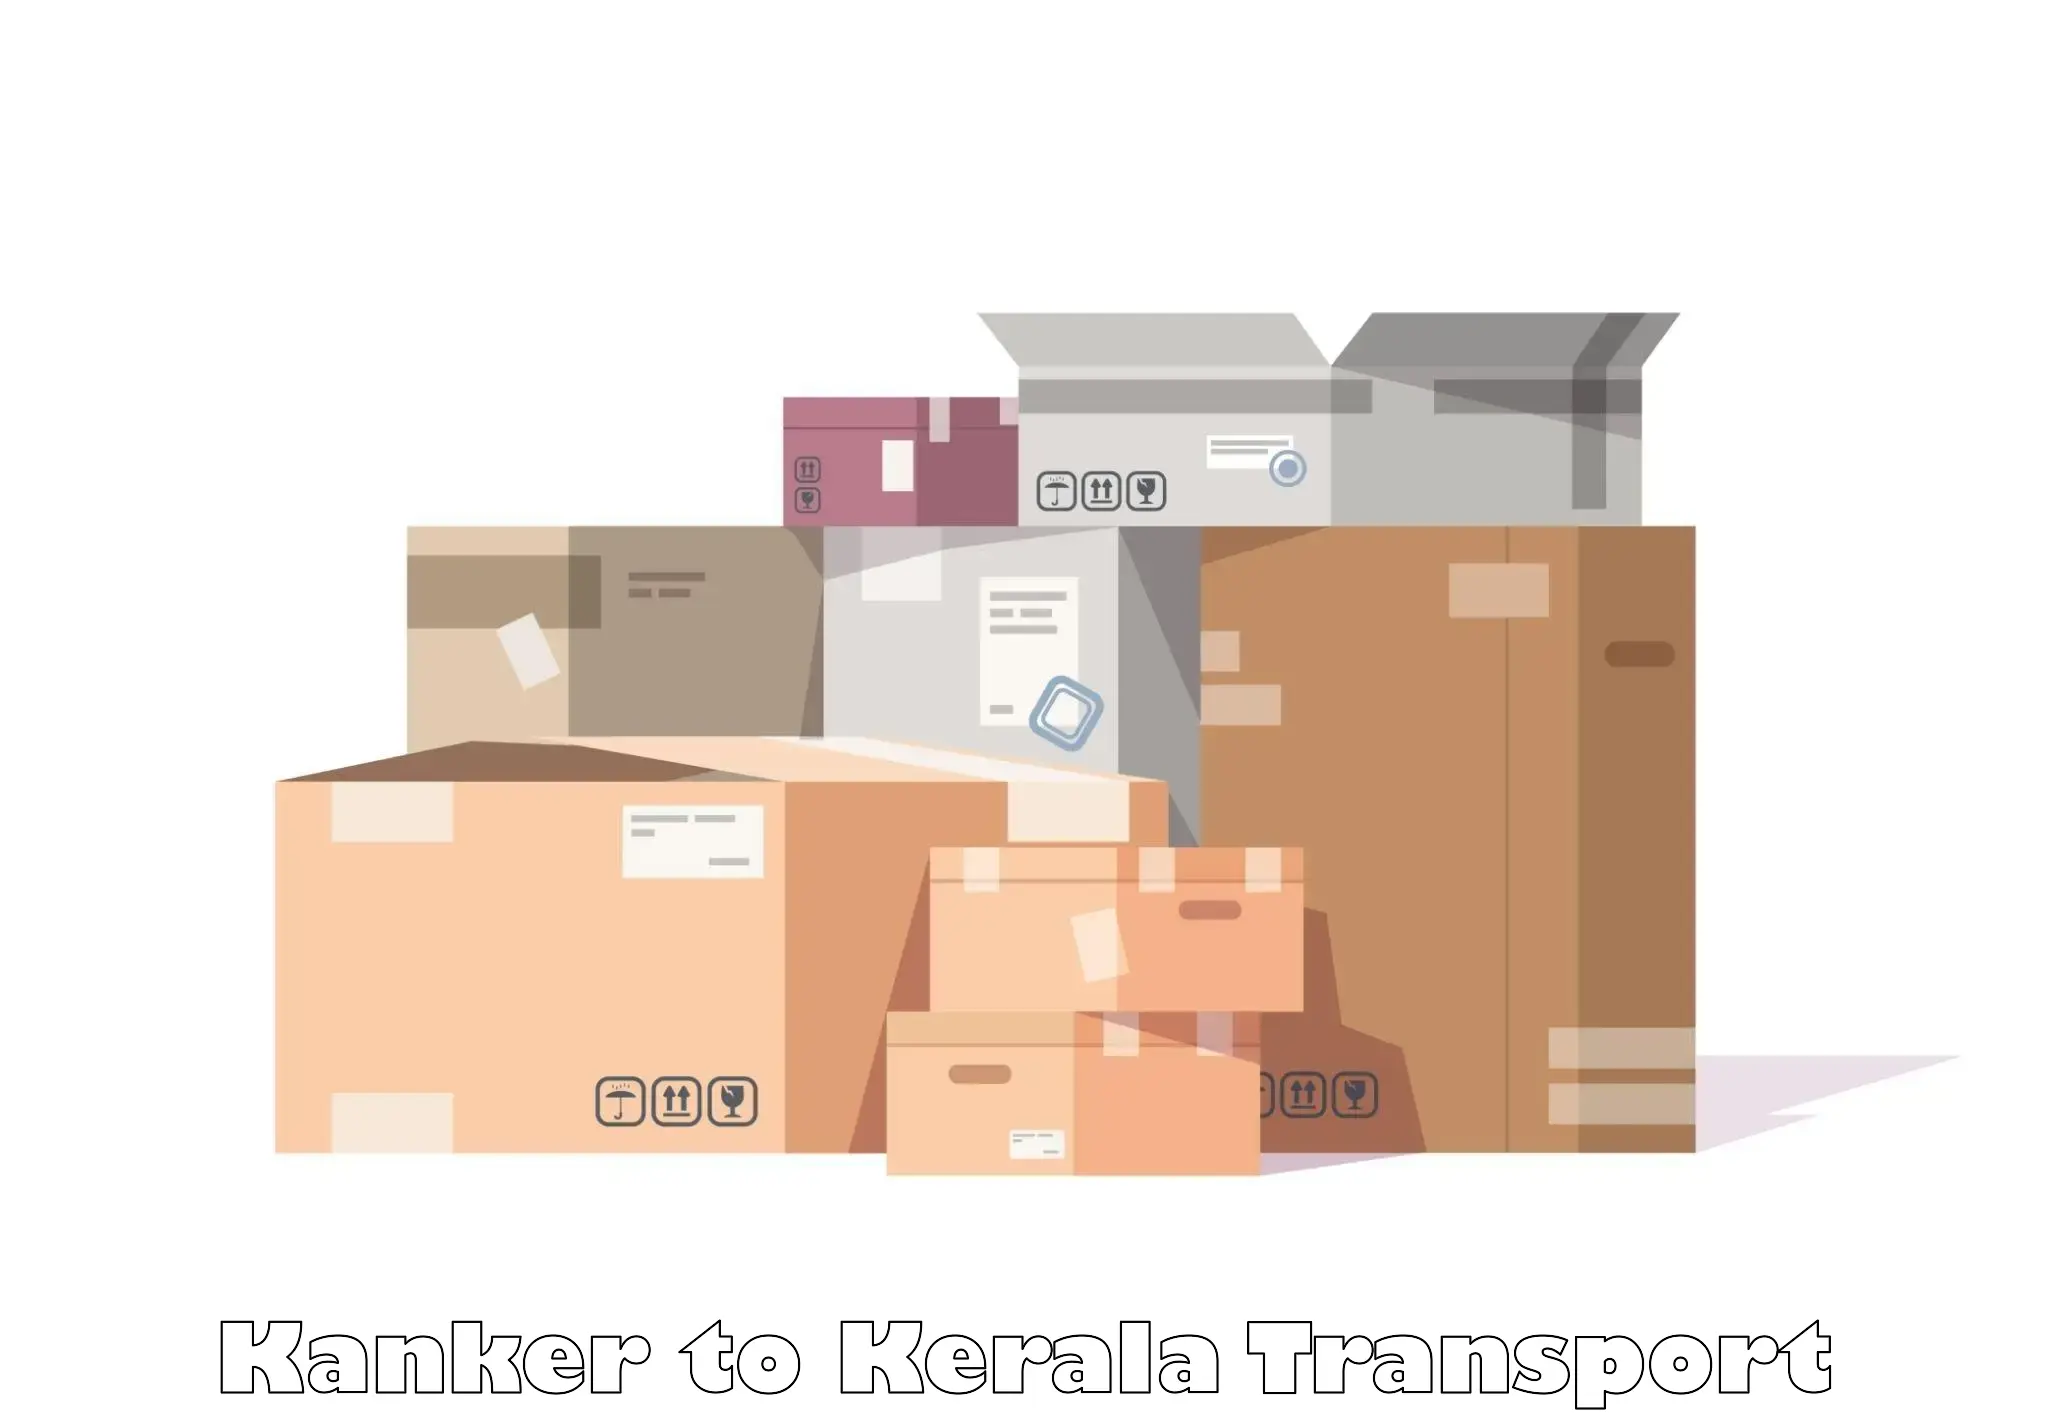 Container transport service Kanker to Rajamudy